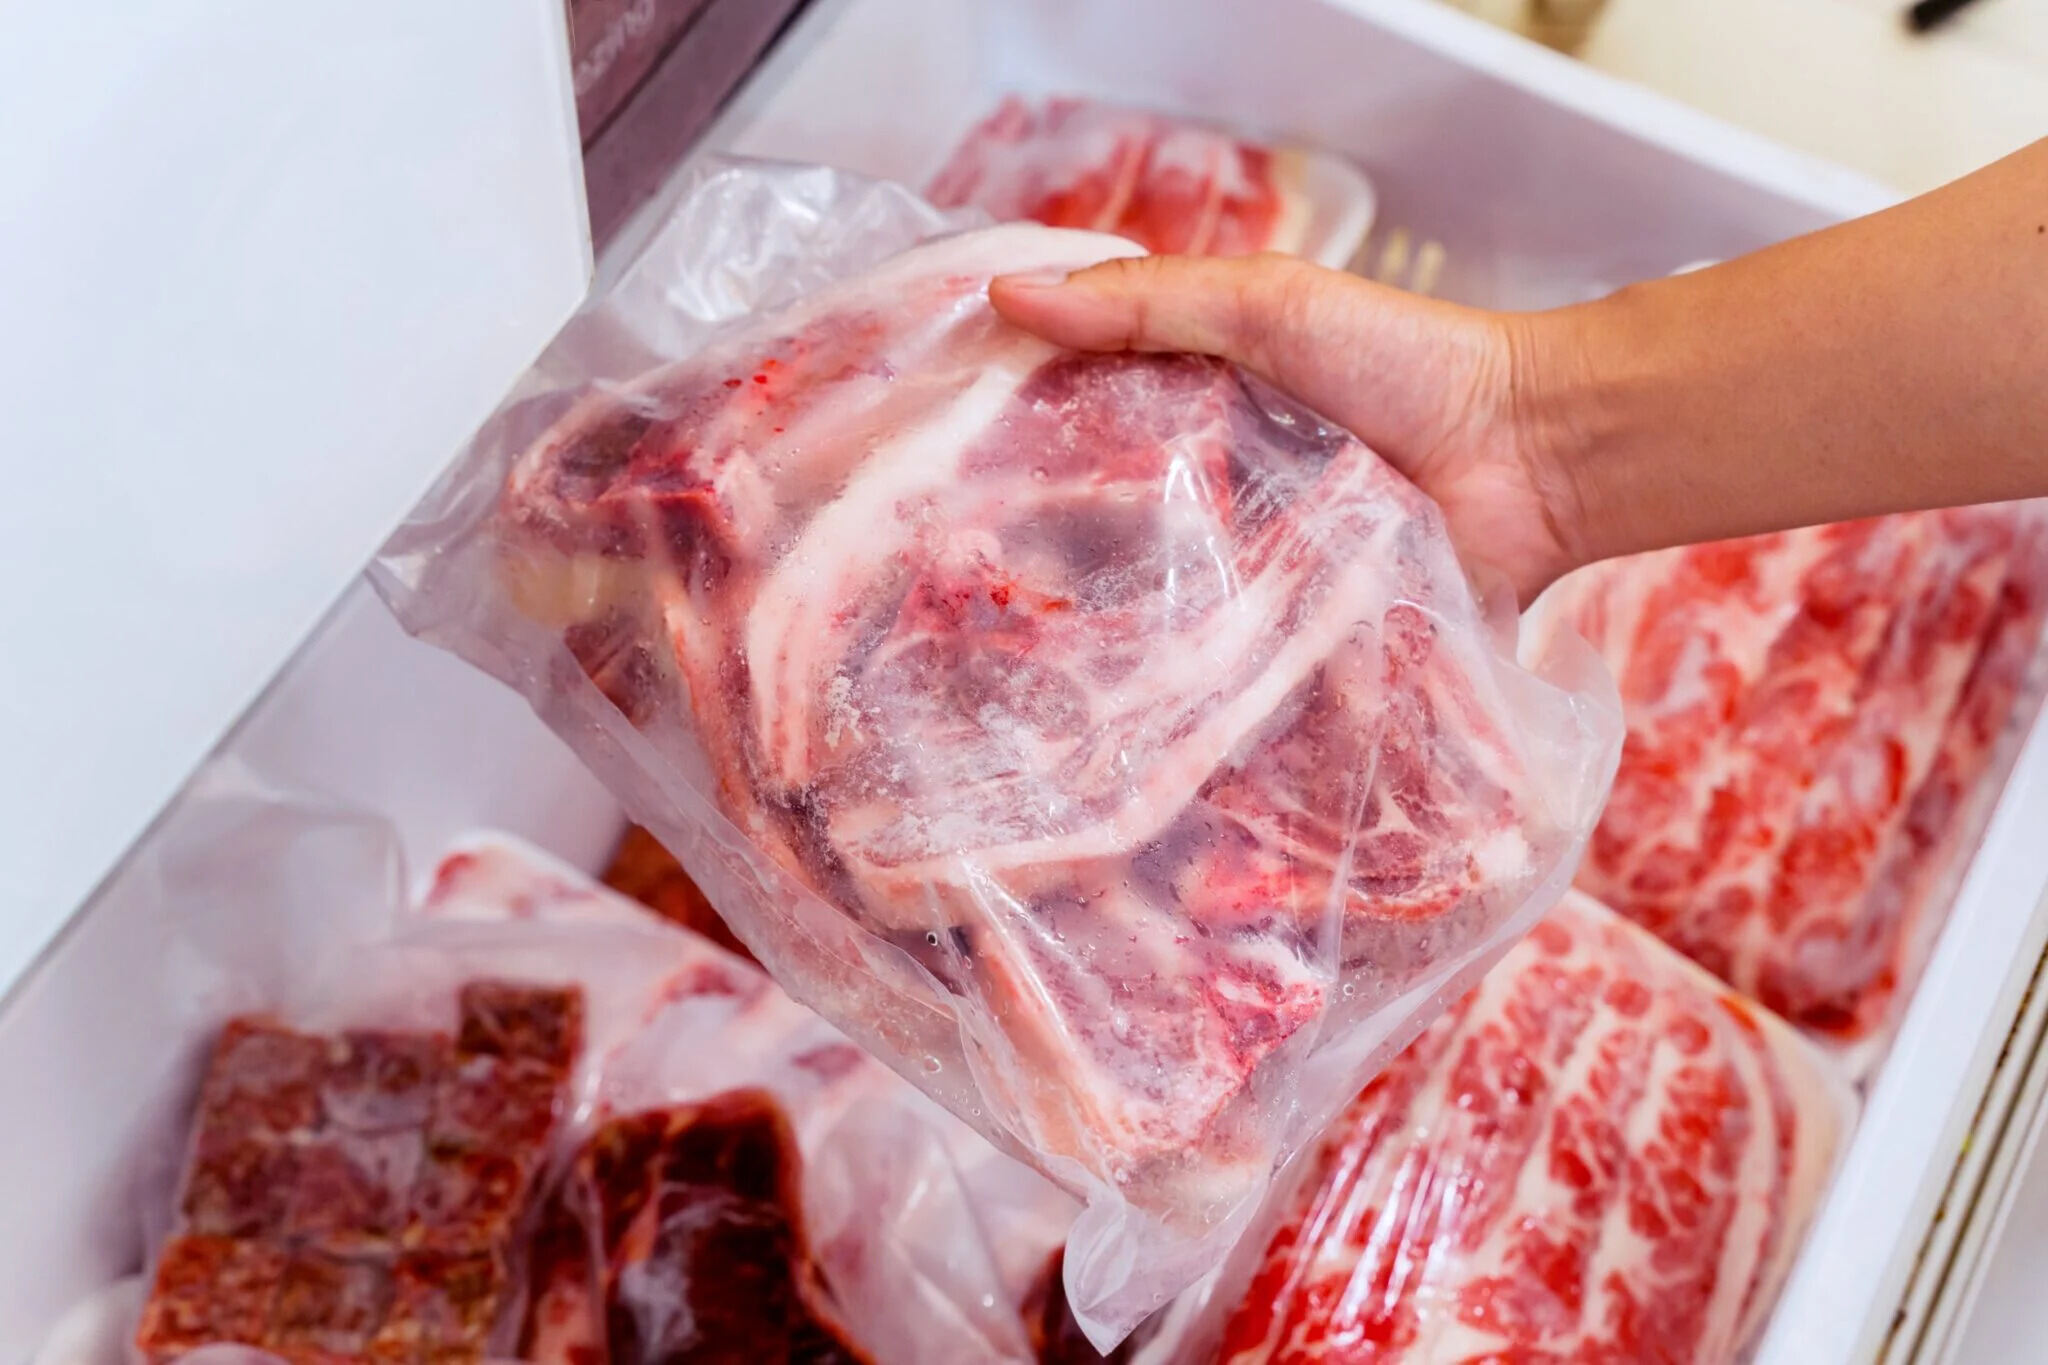 How To Store Meat Long-Term